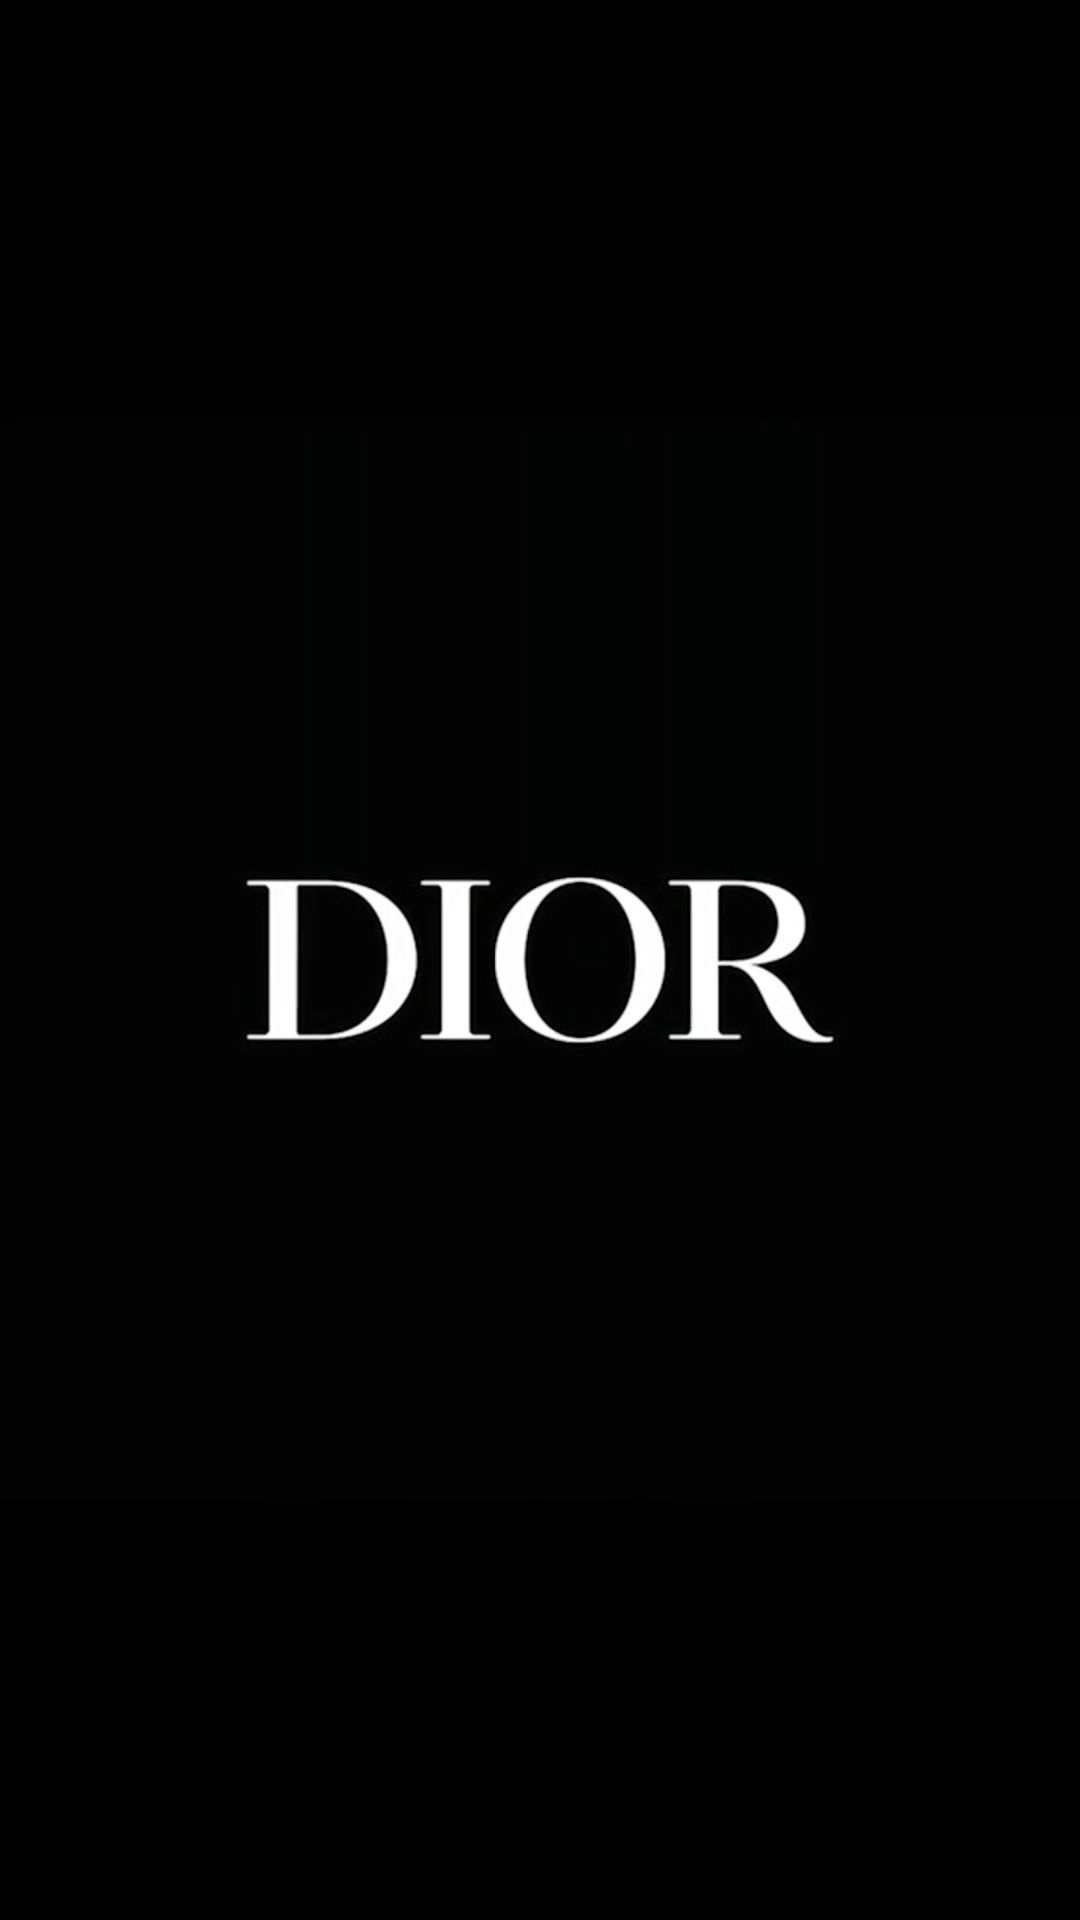 Dior: The brand with a rich history, Full of impressive creatives and classic designs. 1080x1920 Full HD Wallpaper.